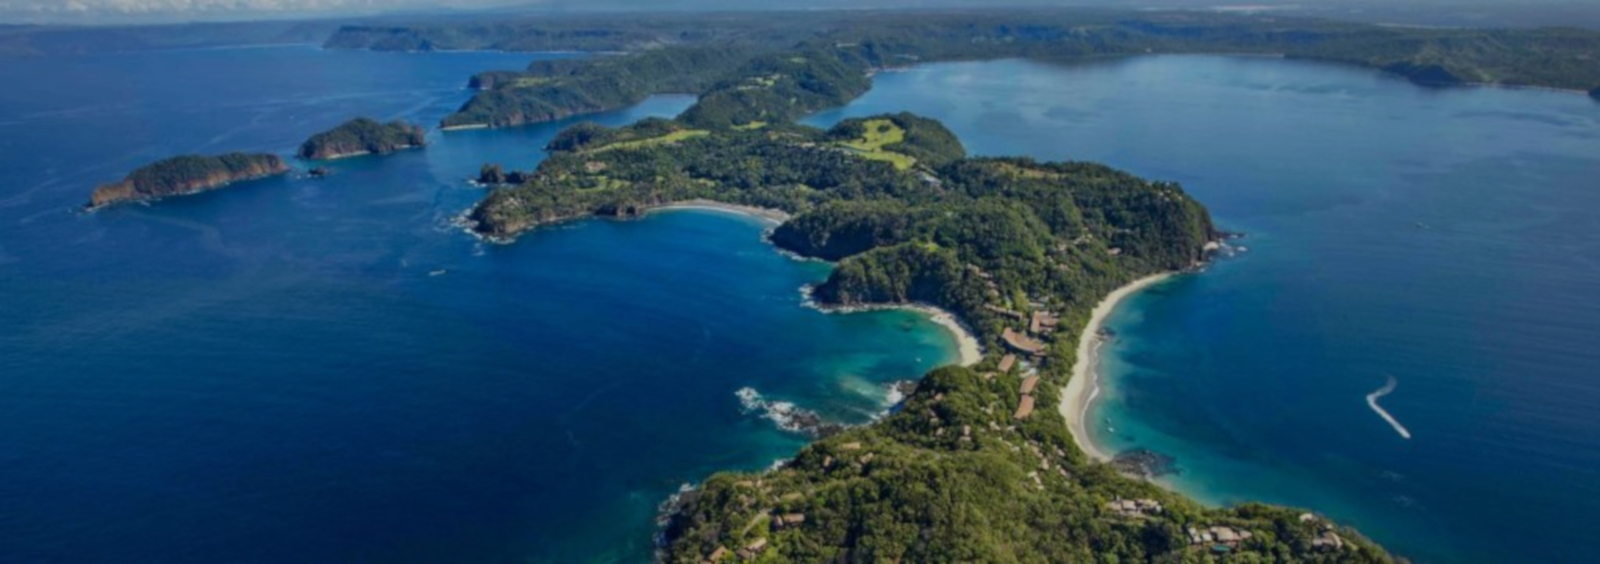 Papagayo Tours Costa Rica - Native's Way Costa Rica Tours Transfers and Packages